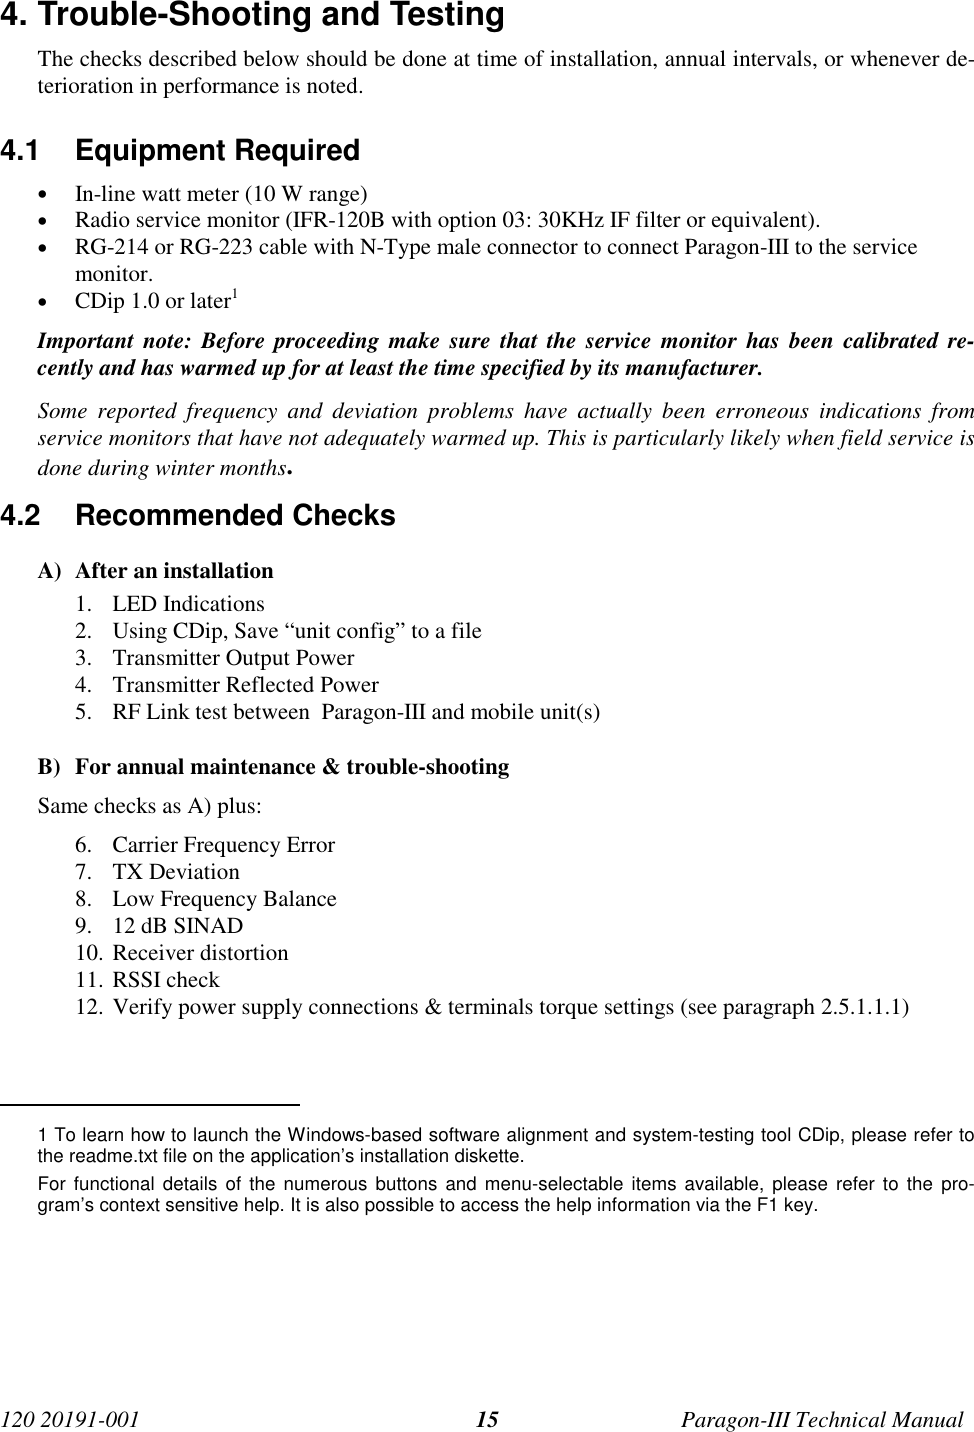 120 20191-001 Paragon-III Technical Manual154. Trouble-Shooting and TestingThe checks described below should be done at time of installation, annual intervals, or whenever de-terioration in performance is noted.4.1 Equipment Required• In-line watt meter (10 W range)• Radio service monitor (IFR-120B with option 03: 30KHz IF filter or equivalent).• RG-214 or RG-223 cable with N-Type male connector to connect Paragon-III to the servicemonitor.• CDip 1.0 or later1Important note: Before proceeding make sure that the service monitor has been calibrated re-cently and has warmed up for at least the time specified by its manufacturer.Some reported frequency and deviation problems have actually been erroneous indications fromservice monitors that have not adequately warmed up. This is particularly likely when field service isdone during winter months.4.2 Recommended ChecksA) After an installation1. LED Indications2. Using CDip, Save “unit config” to a file3. Transmitter Output Power4. Transmitter Reflected Power5. RF Link test between  Paragon-III and mobile unit(s)B) For annual maintenance &amp; trouble-shootingSame checks as A) plus:6. Carrier Frequency Error7. TX Deviation8. Low Frequency Balance9. 12 dB SINAD10. Receiver distortion11. RSSI check12. Verify power supply connections &amp; terminals torque settings (see paragraph 2.5.1.1.1)                                           1 To learn how to launch the Windows-based software alignment and system-testing tool CDip, please refer tothe readme.txt file on the application’s installation diskette.For functional details of the numerous buttons and menu-selectable items available, please refer to the pro-gram’s context sensitive help. It is also possible to access the help information via the F1 key.